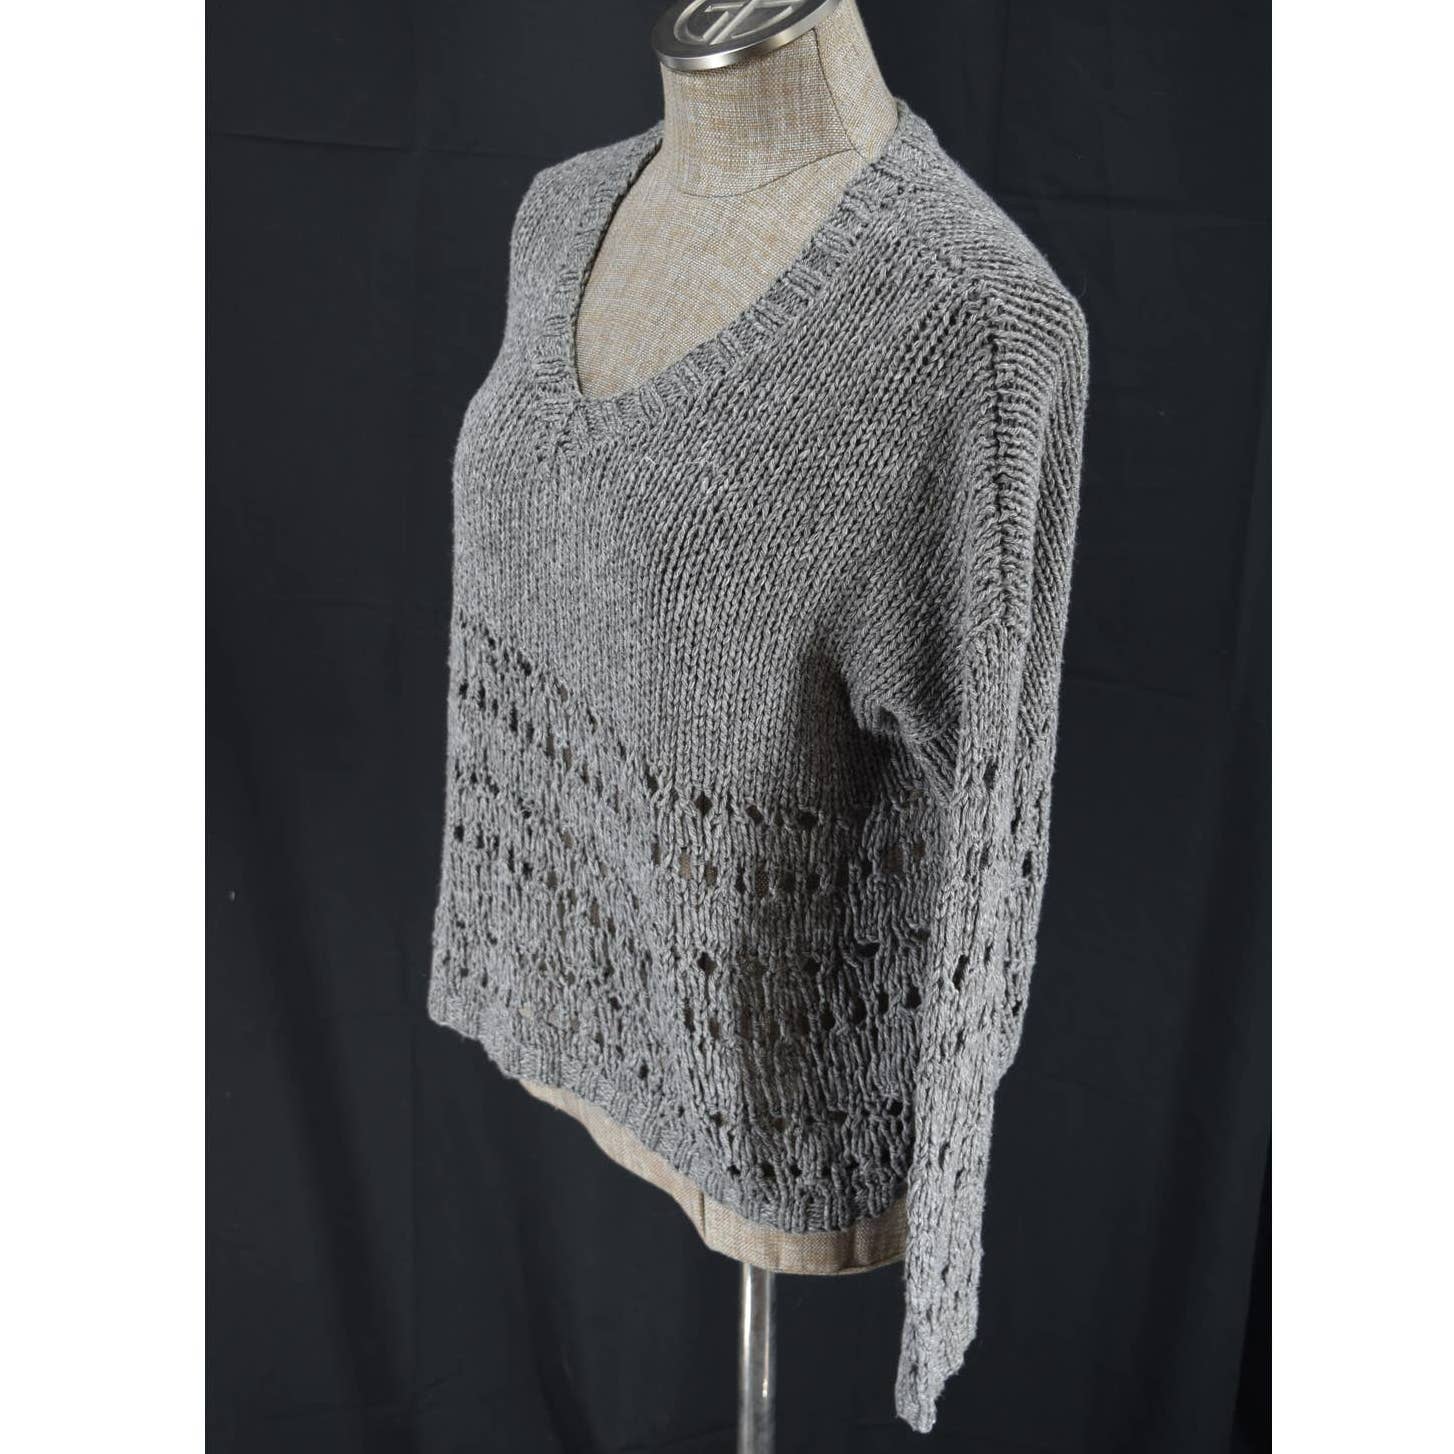 Vince Knitted by Hand Gray V-Neck Sweater -XS